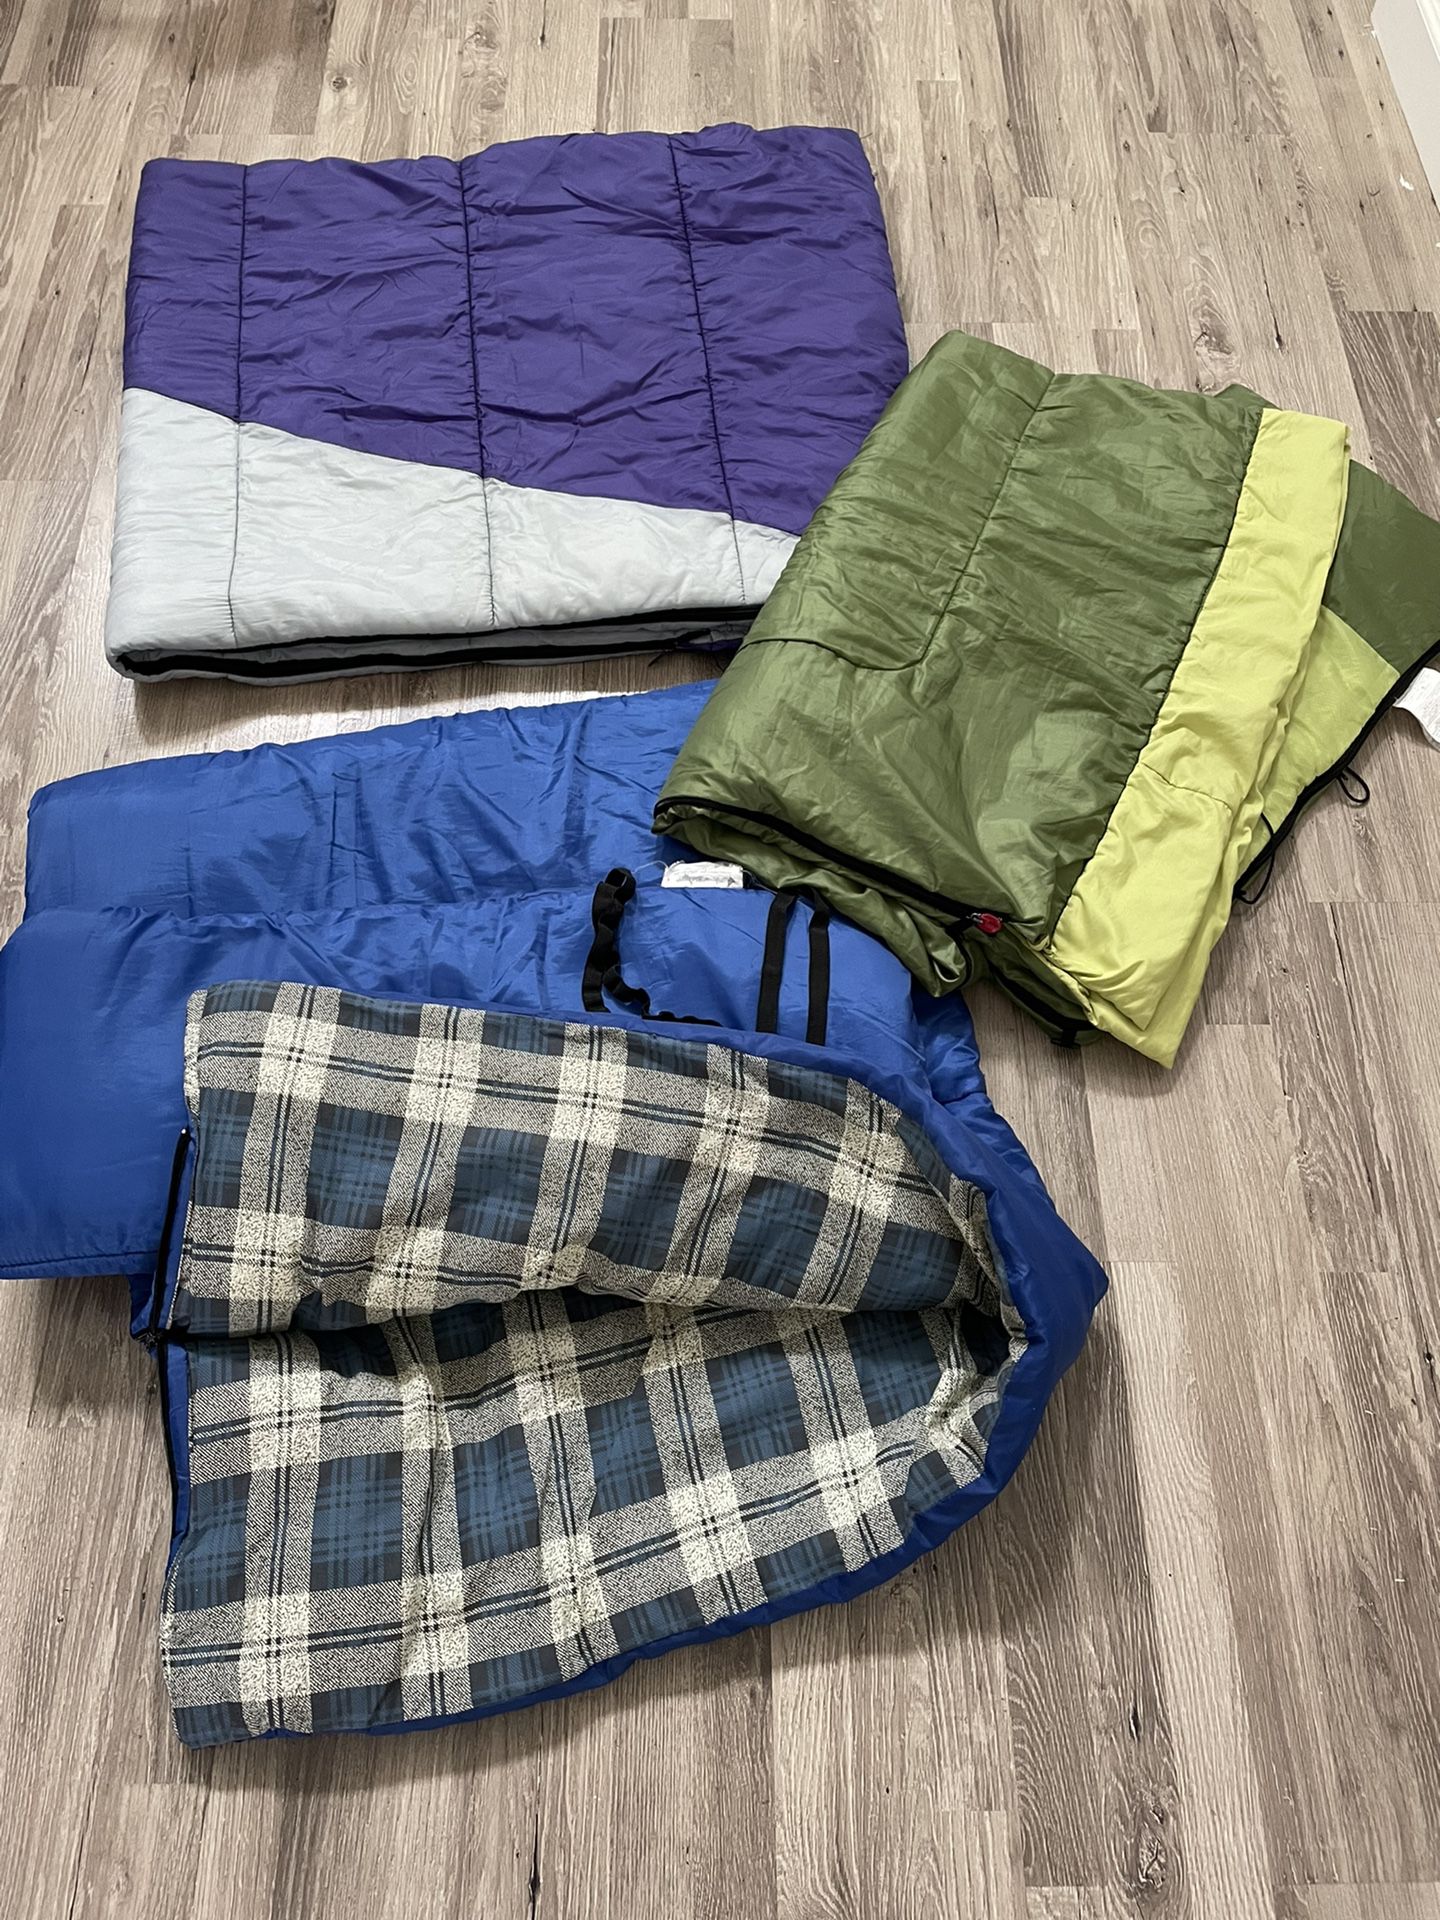 3 Camping Sleeping Bag With Great Condition 